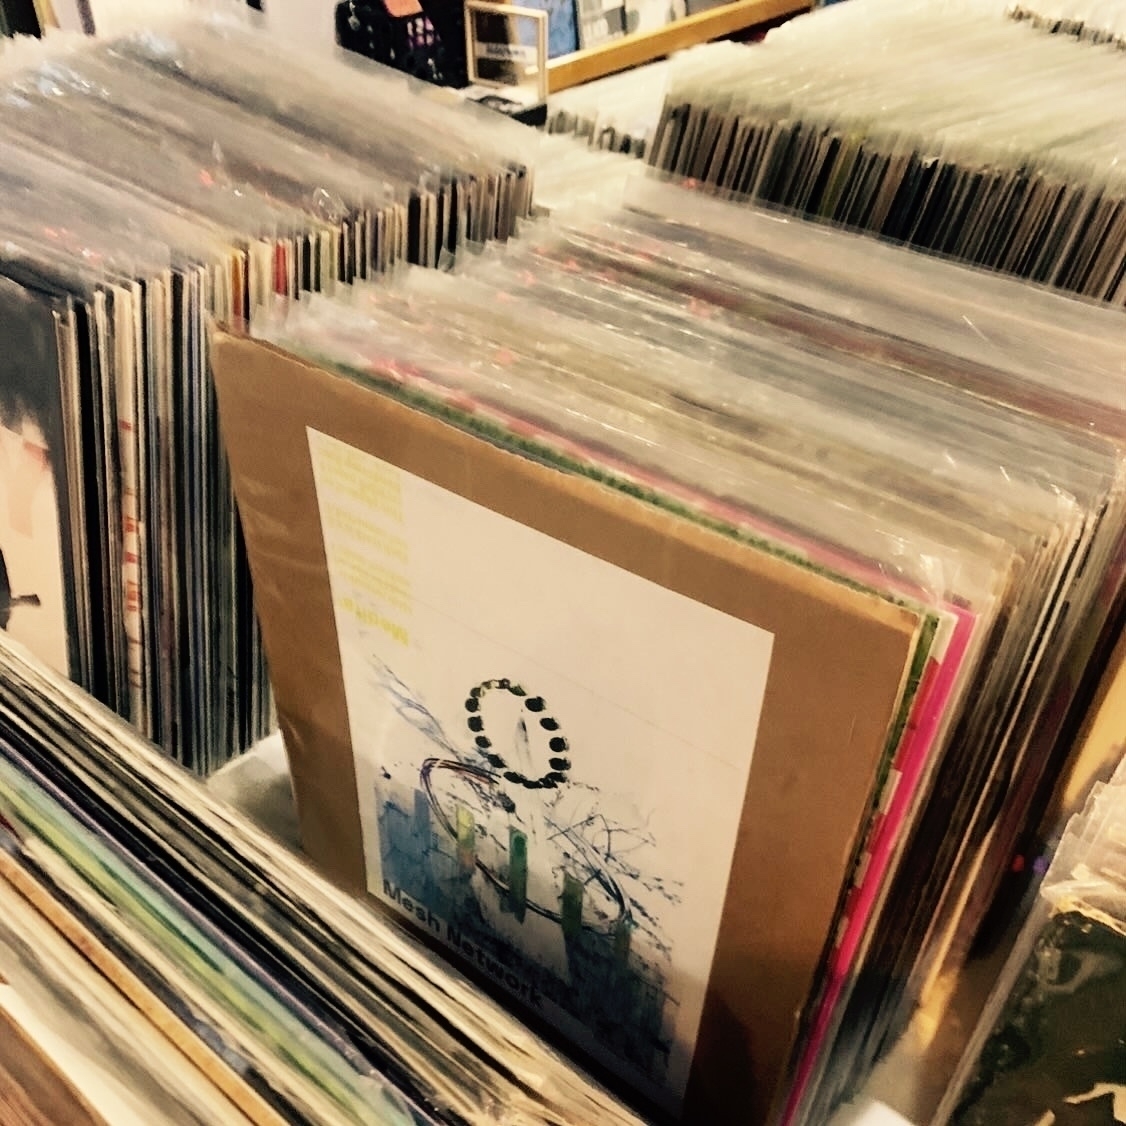 a physical LP-sized release of Mesh Network in a record shop